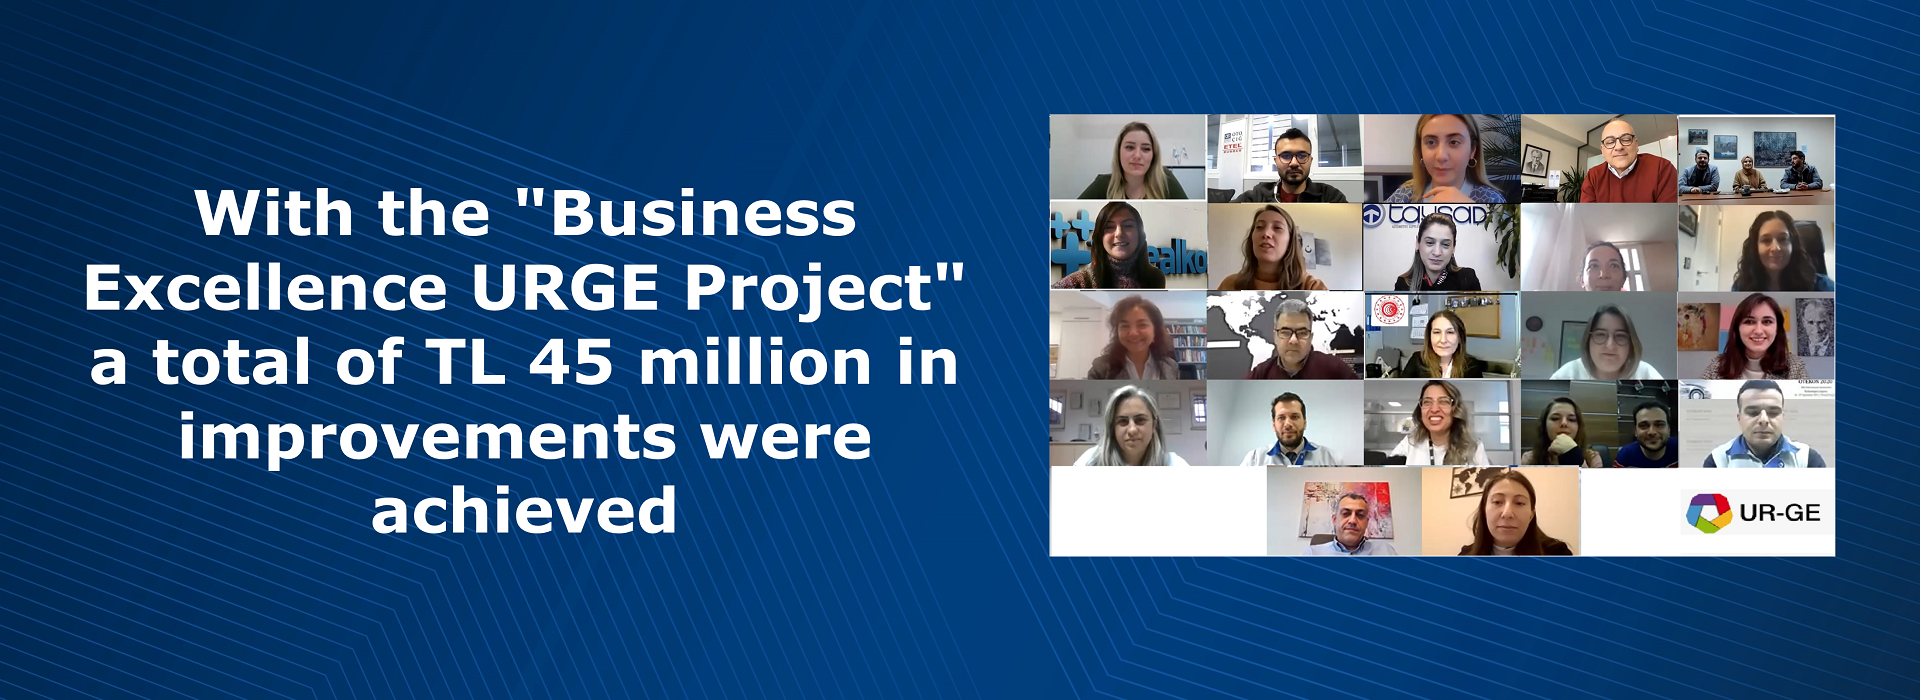 With the Business Excellence URGE Project, a total of TL 45.5 million in improvements were achieved